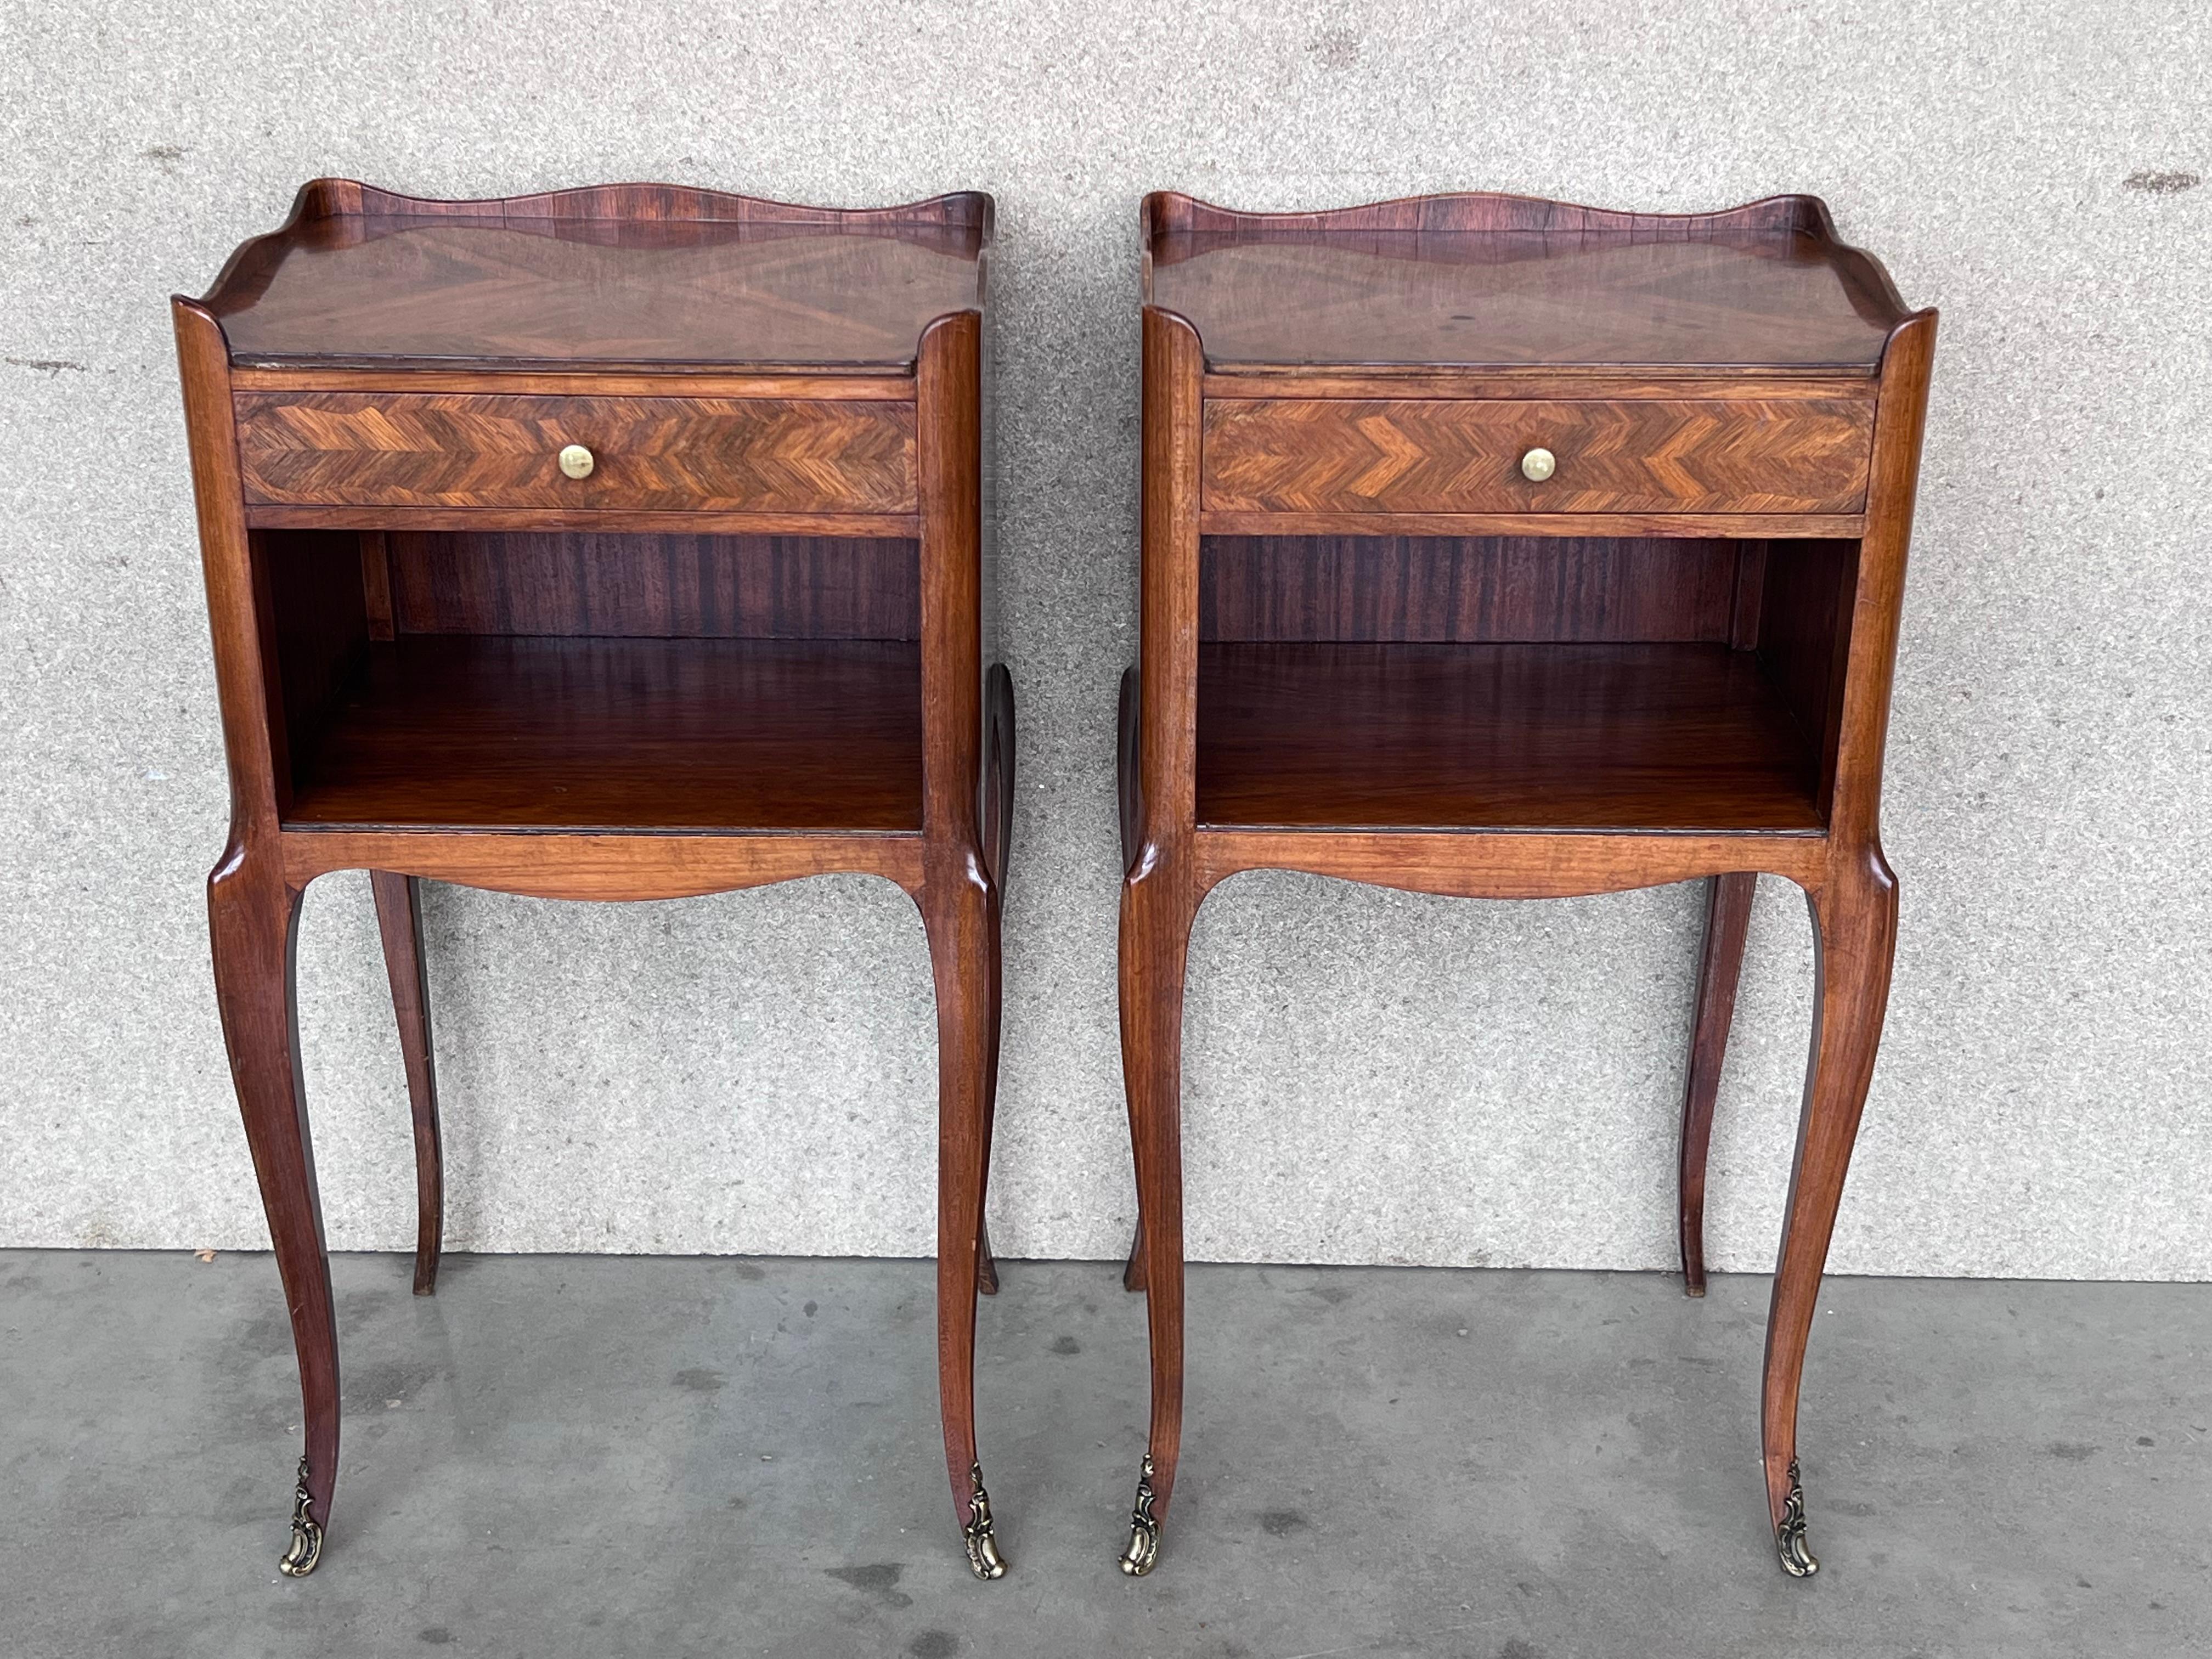 A pretty pair of French, inlaid kingwood, one drawer nightstands with open shelf , circa 1910.
Pair of French Louis XV style walnut bedside tables from the early 20th century. This pair of French 'tables de chevet' was created in the early years of